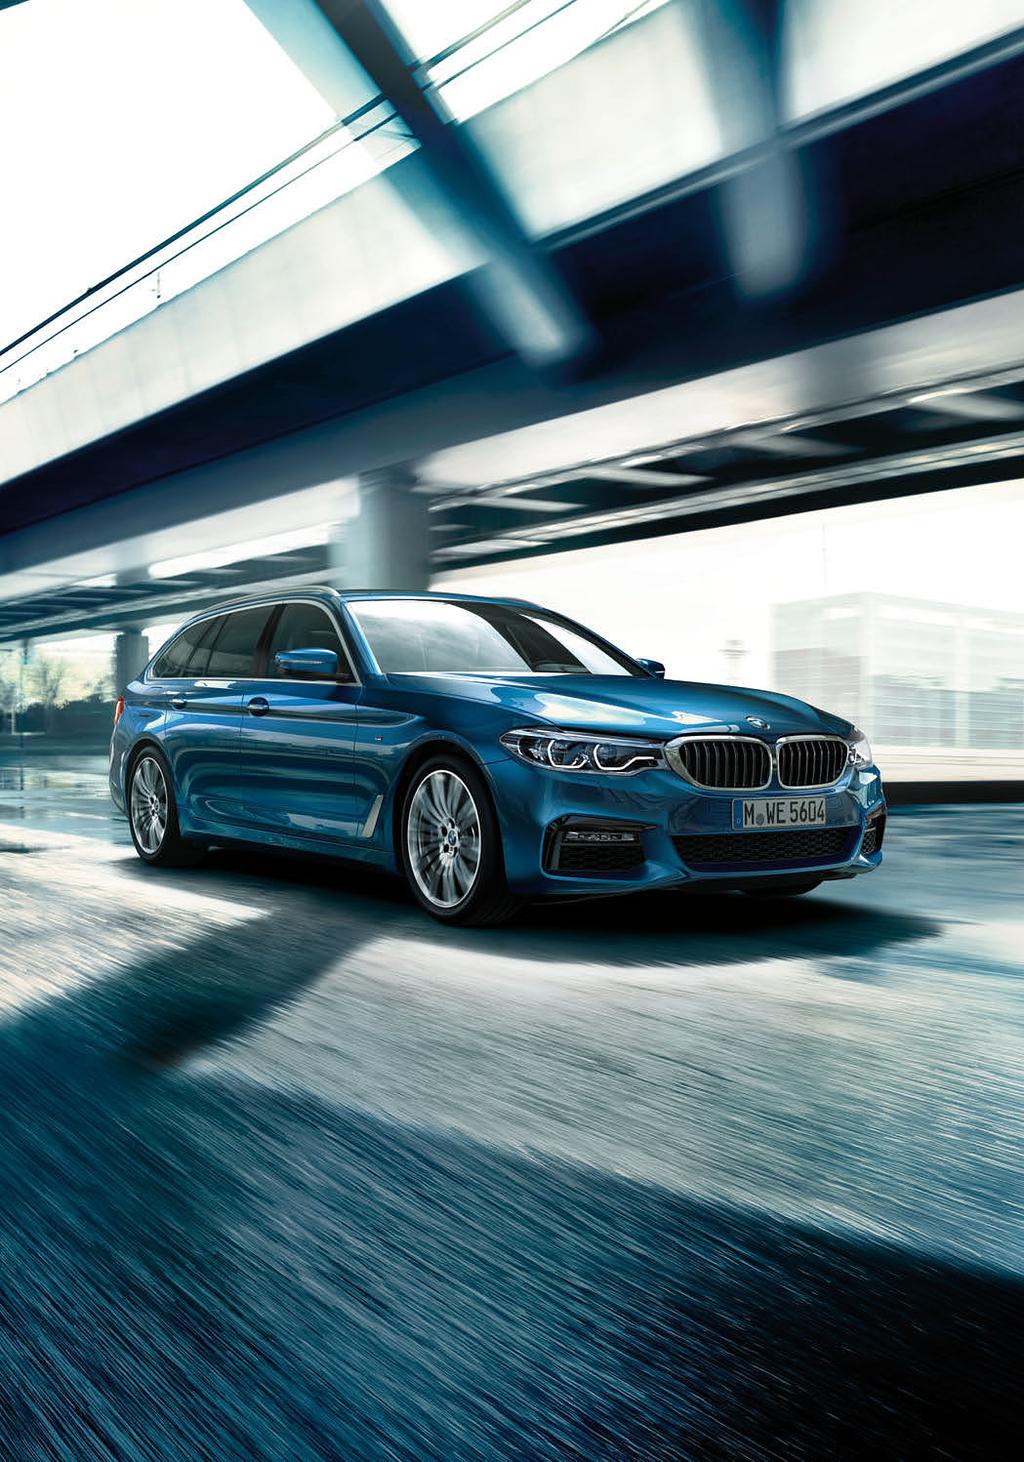 Sheer Driving Pleasure THE NEW BMW 5 SERIES TOURING.